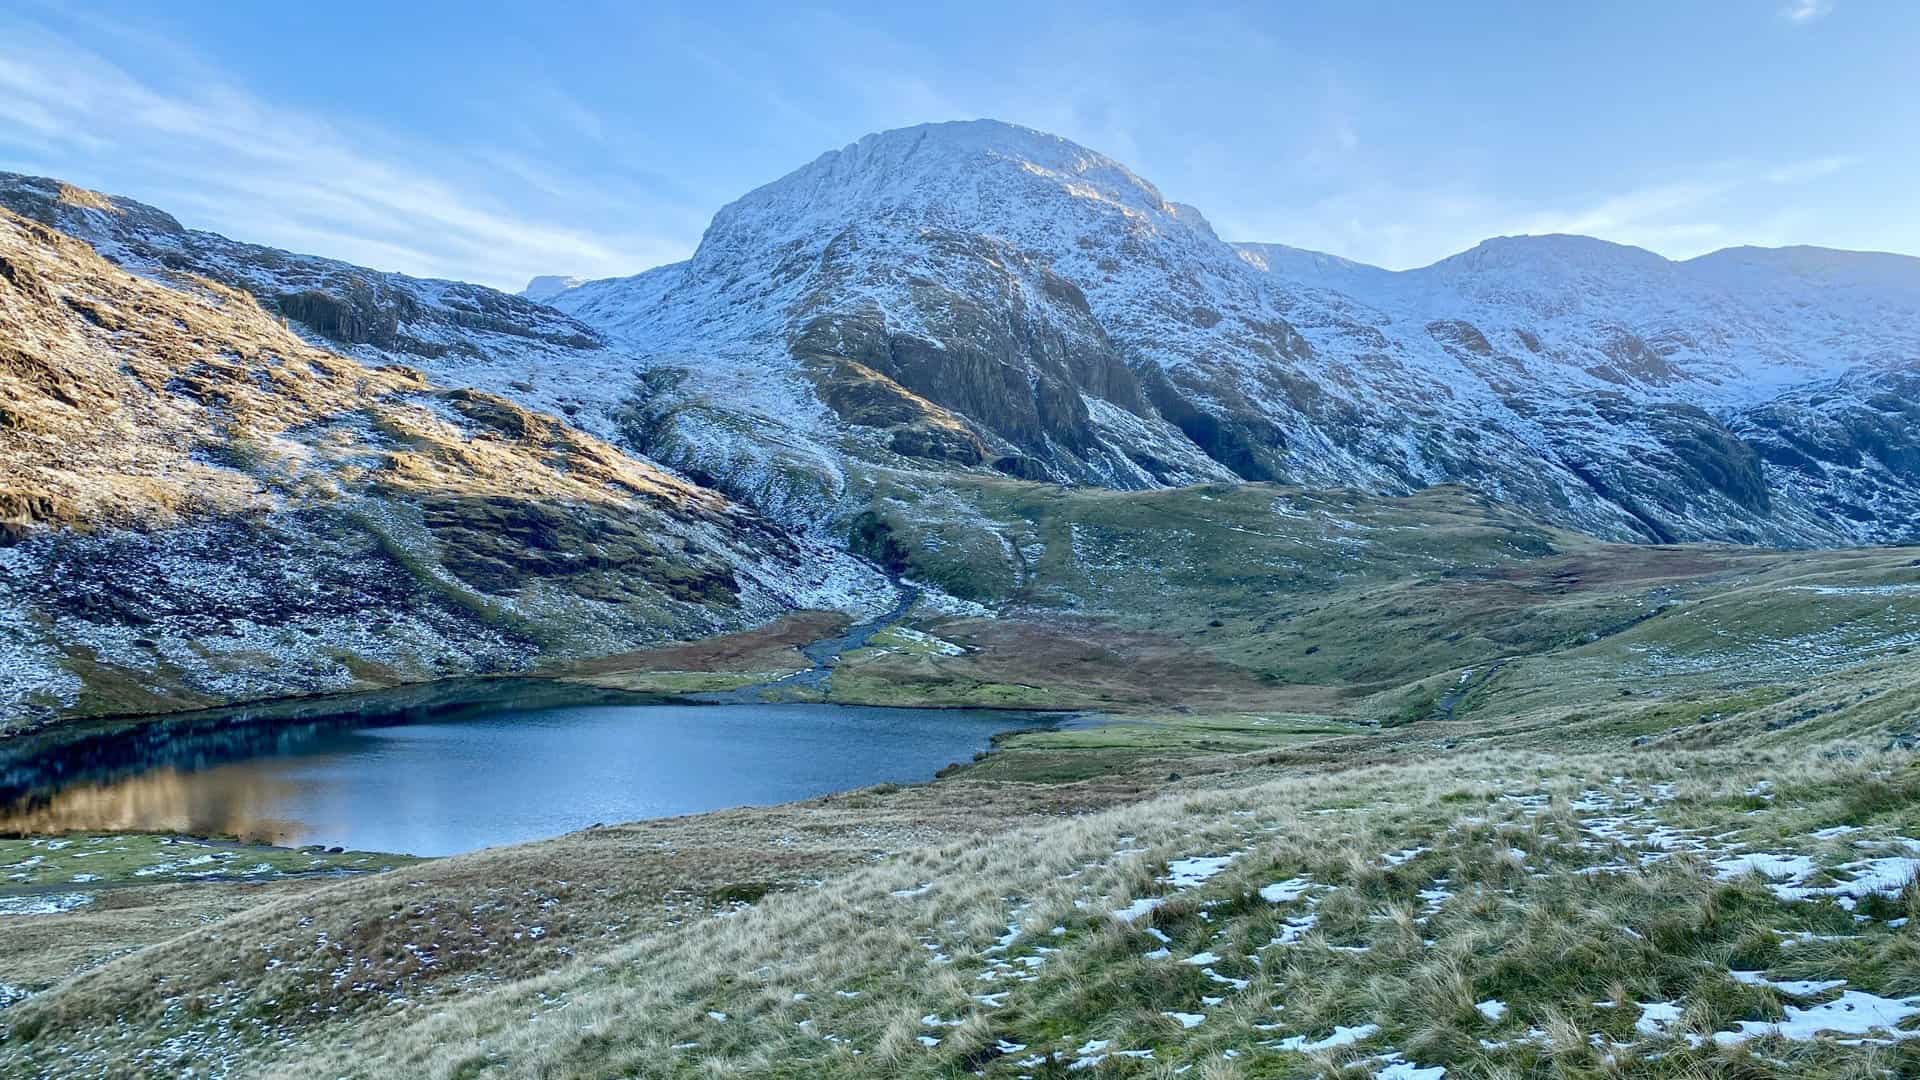 The view of Great End from Styhead Tarn.